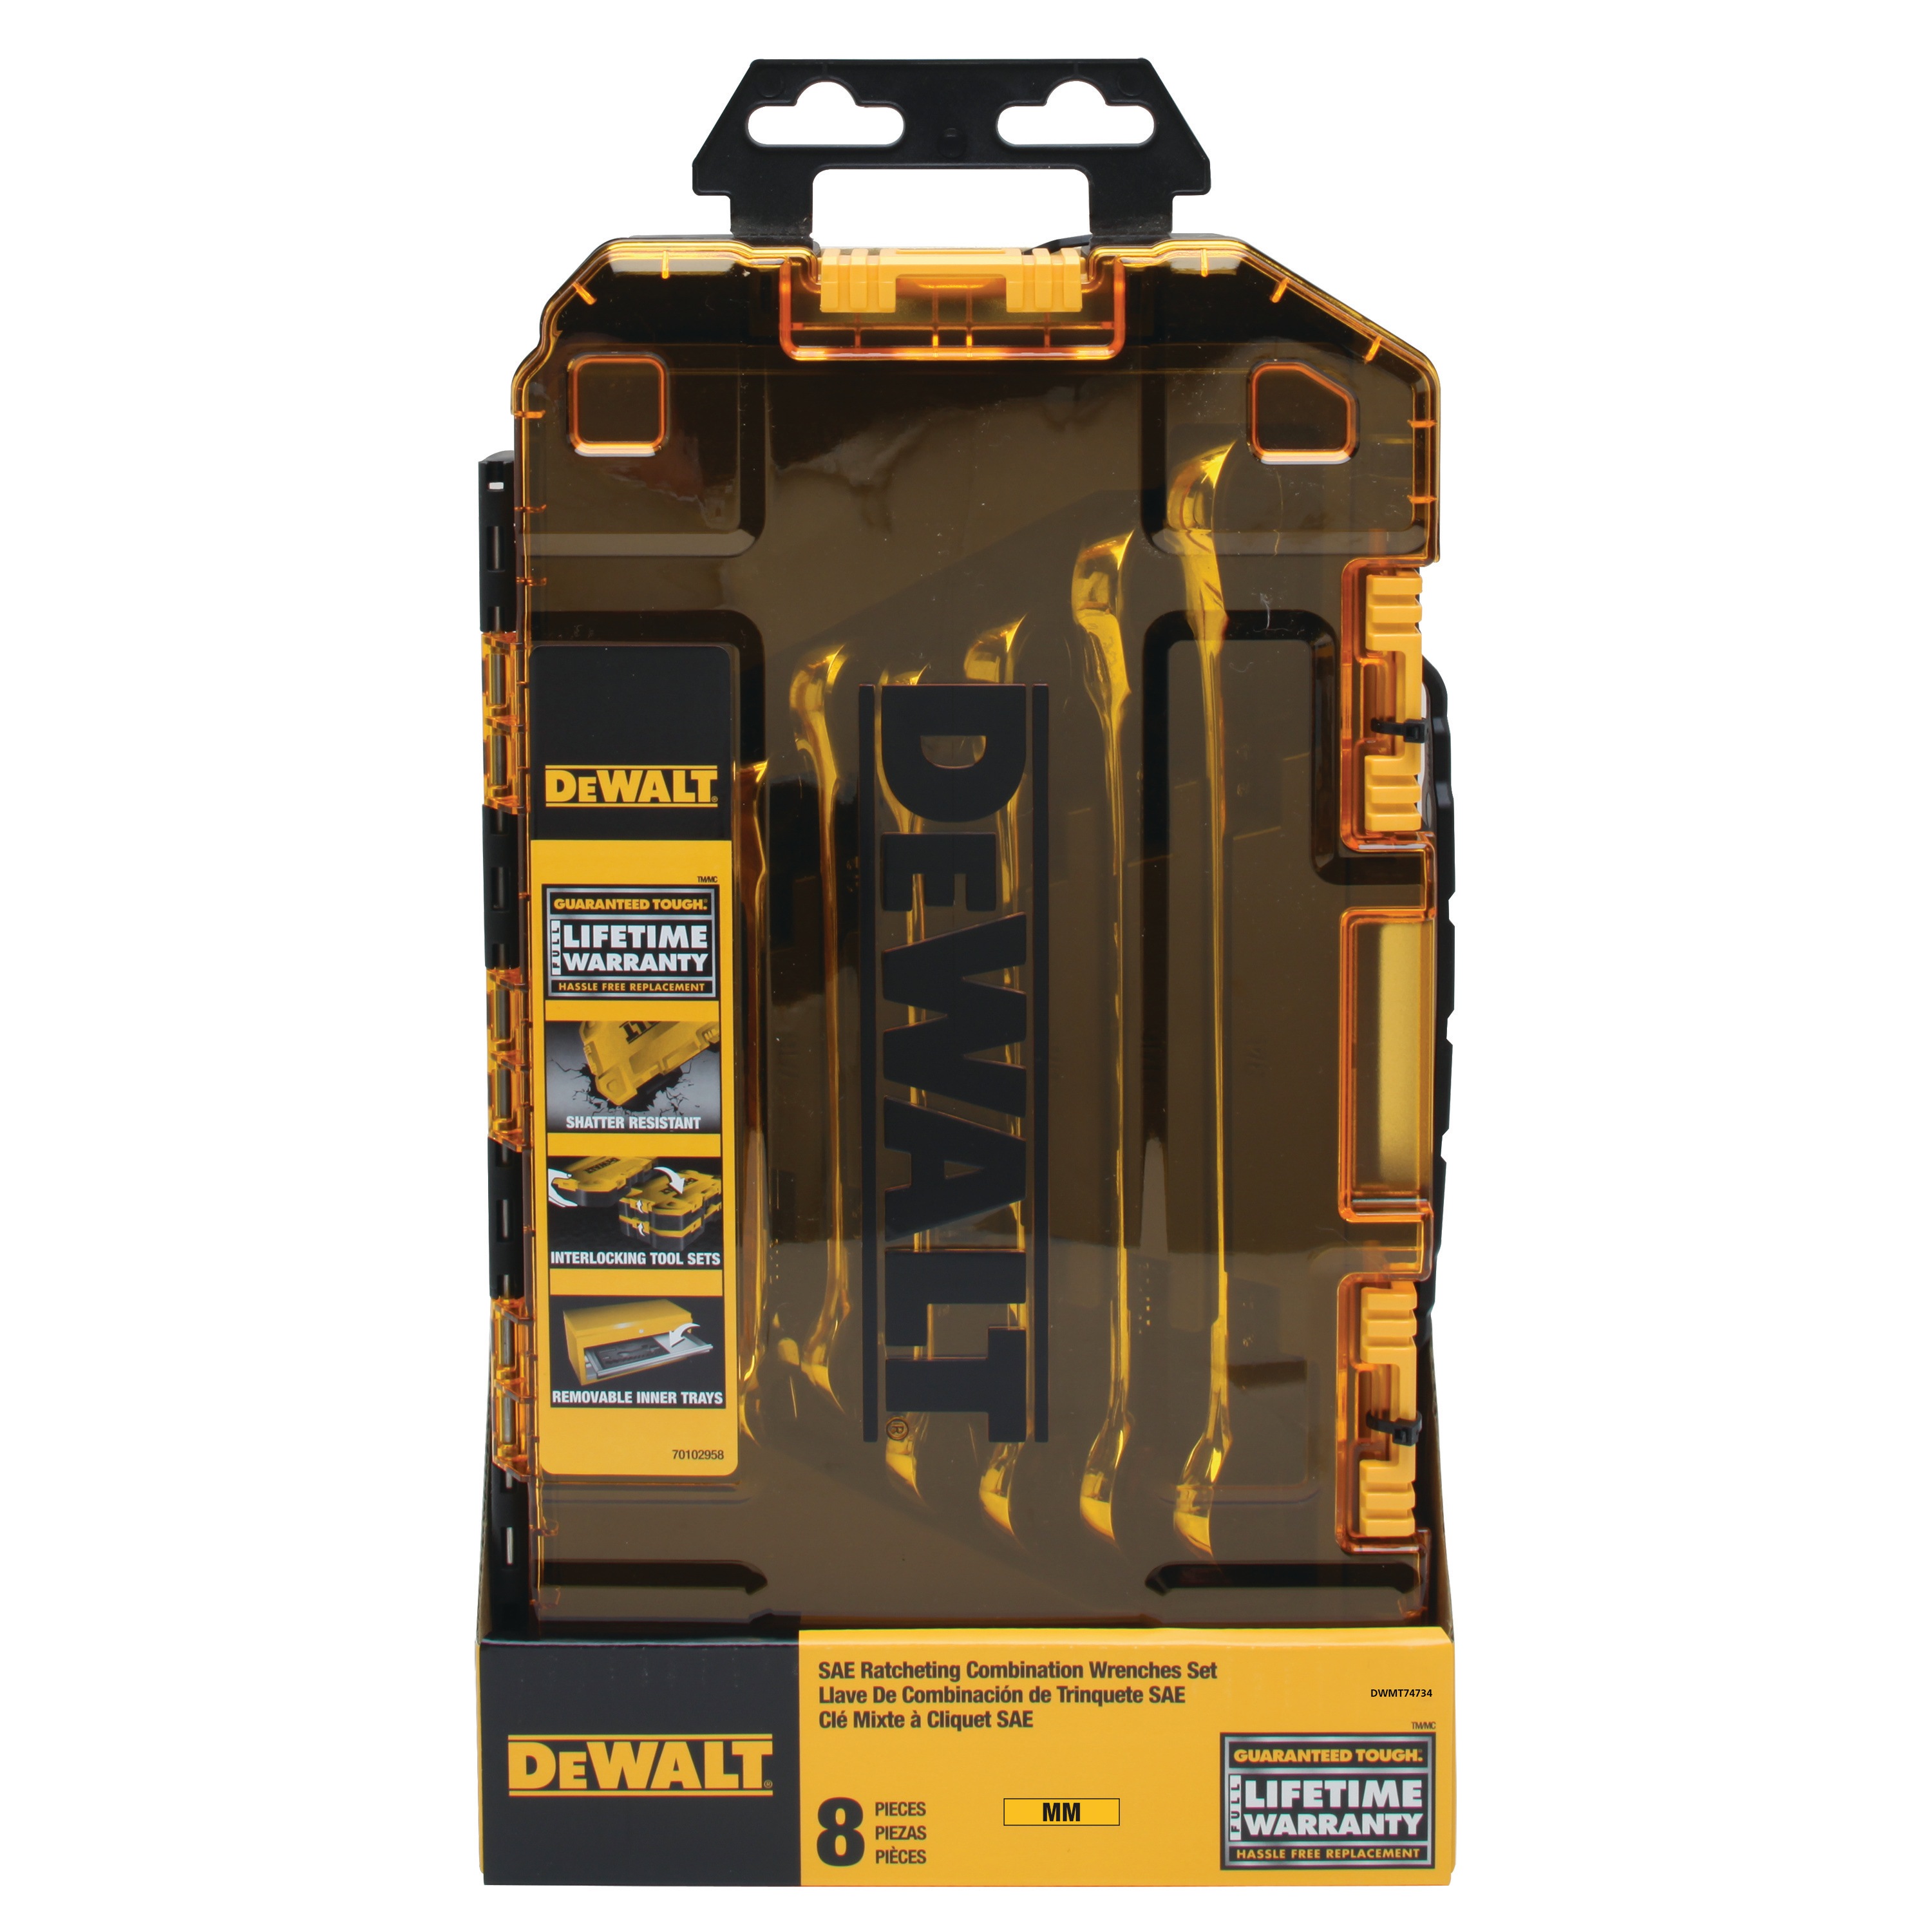 DEWALT 8 piece full polish ratcheting combination metric wrench set packed in its case.